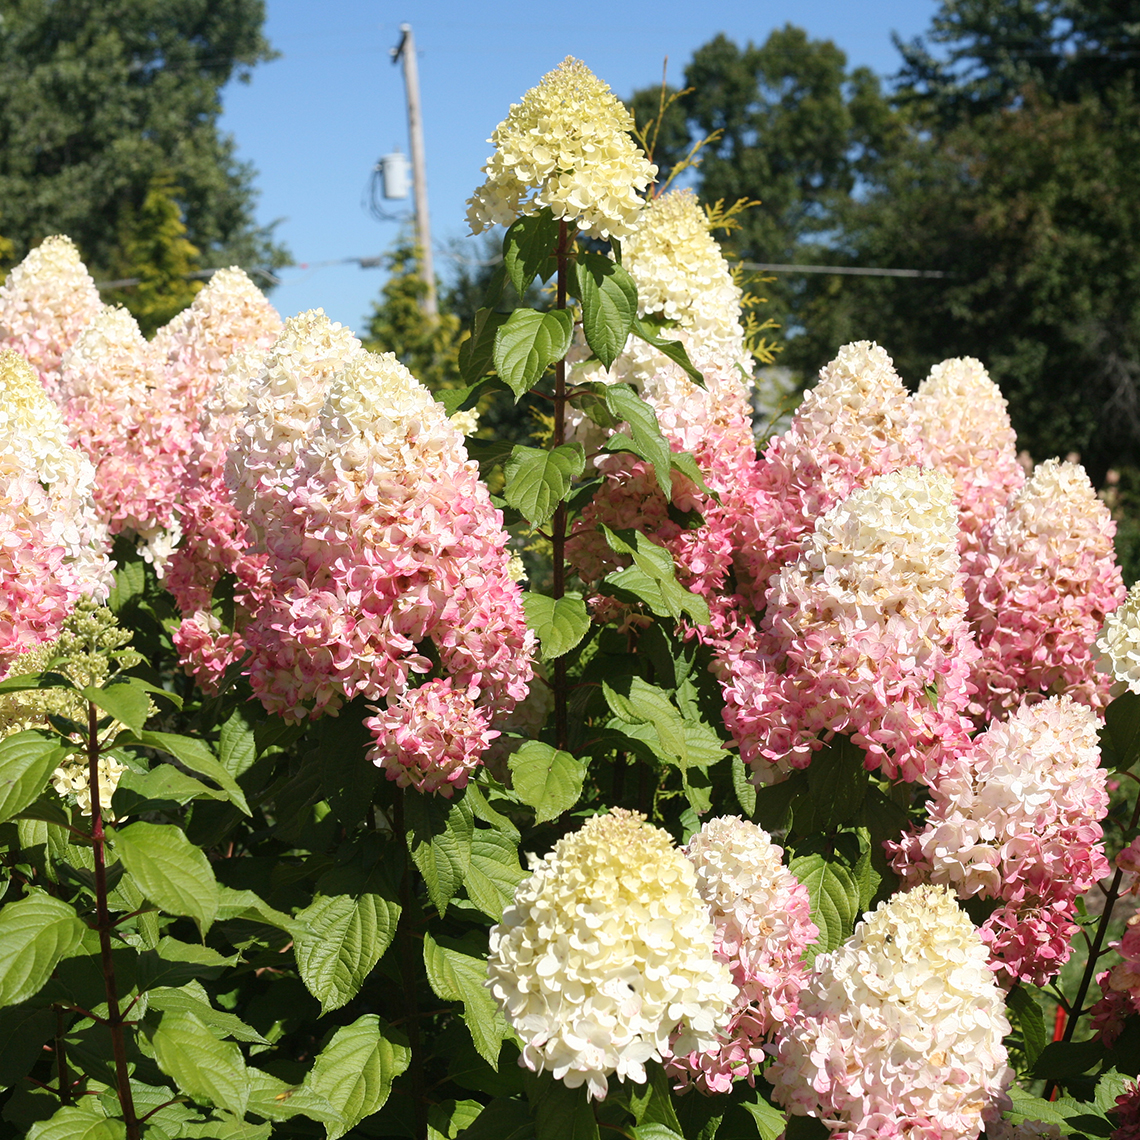 Closeup of several blooms of Pillow Talk hydrangea starting to blush with a nice pink color